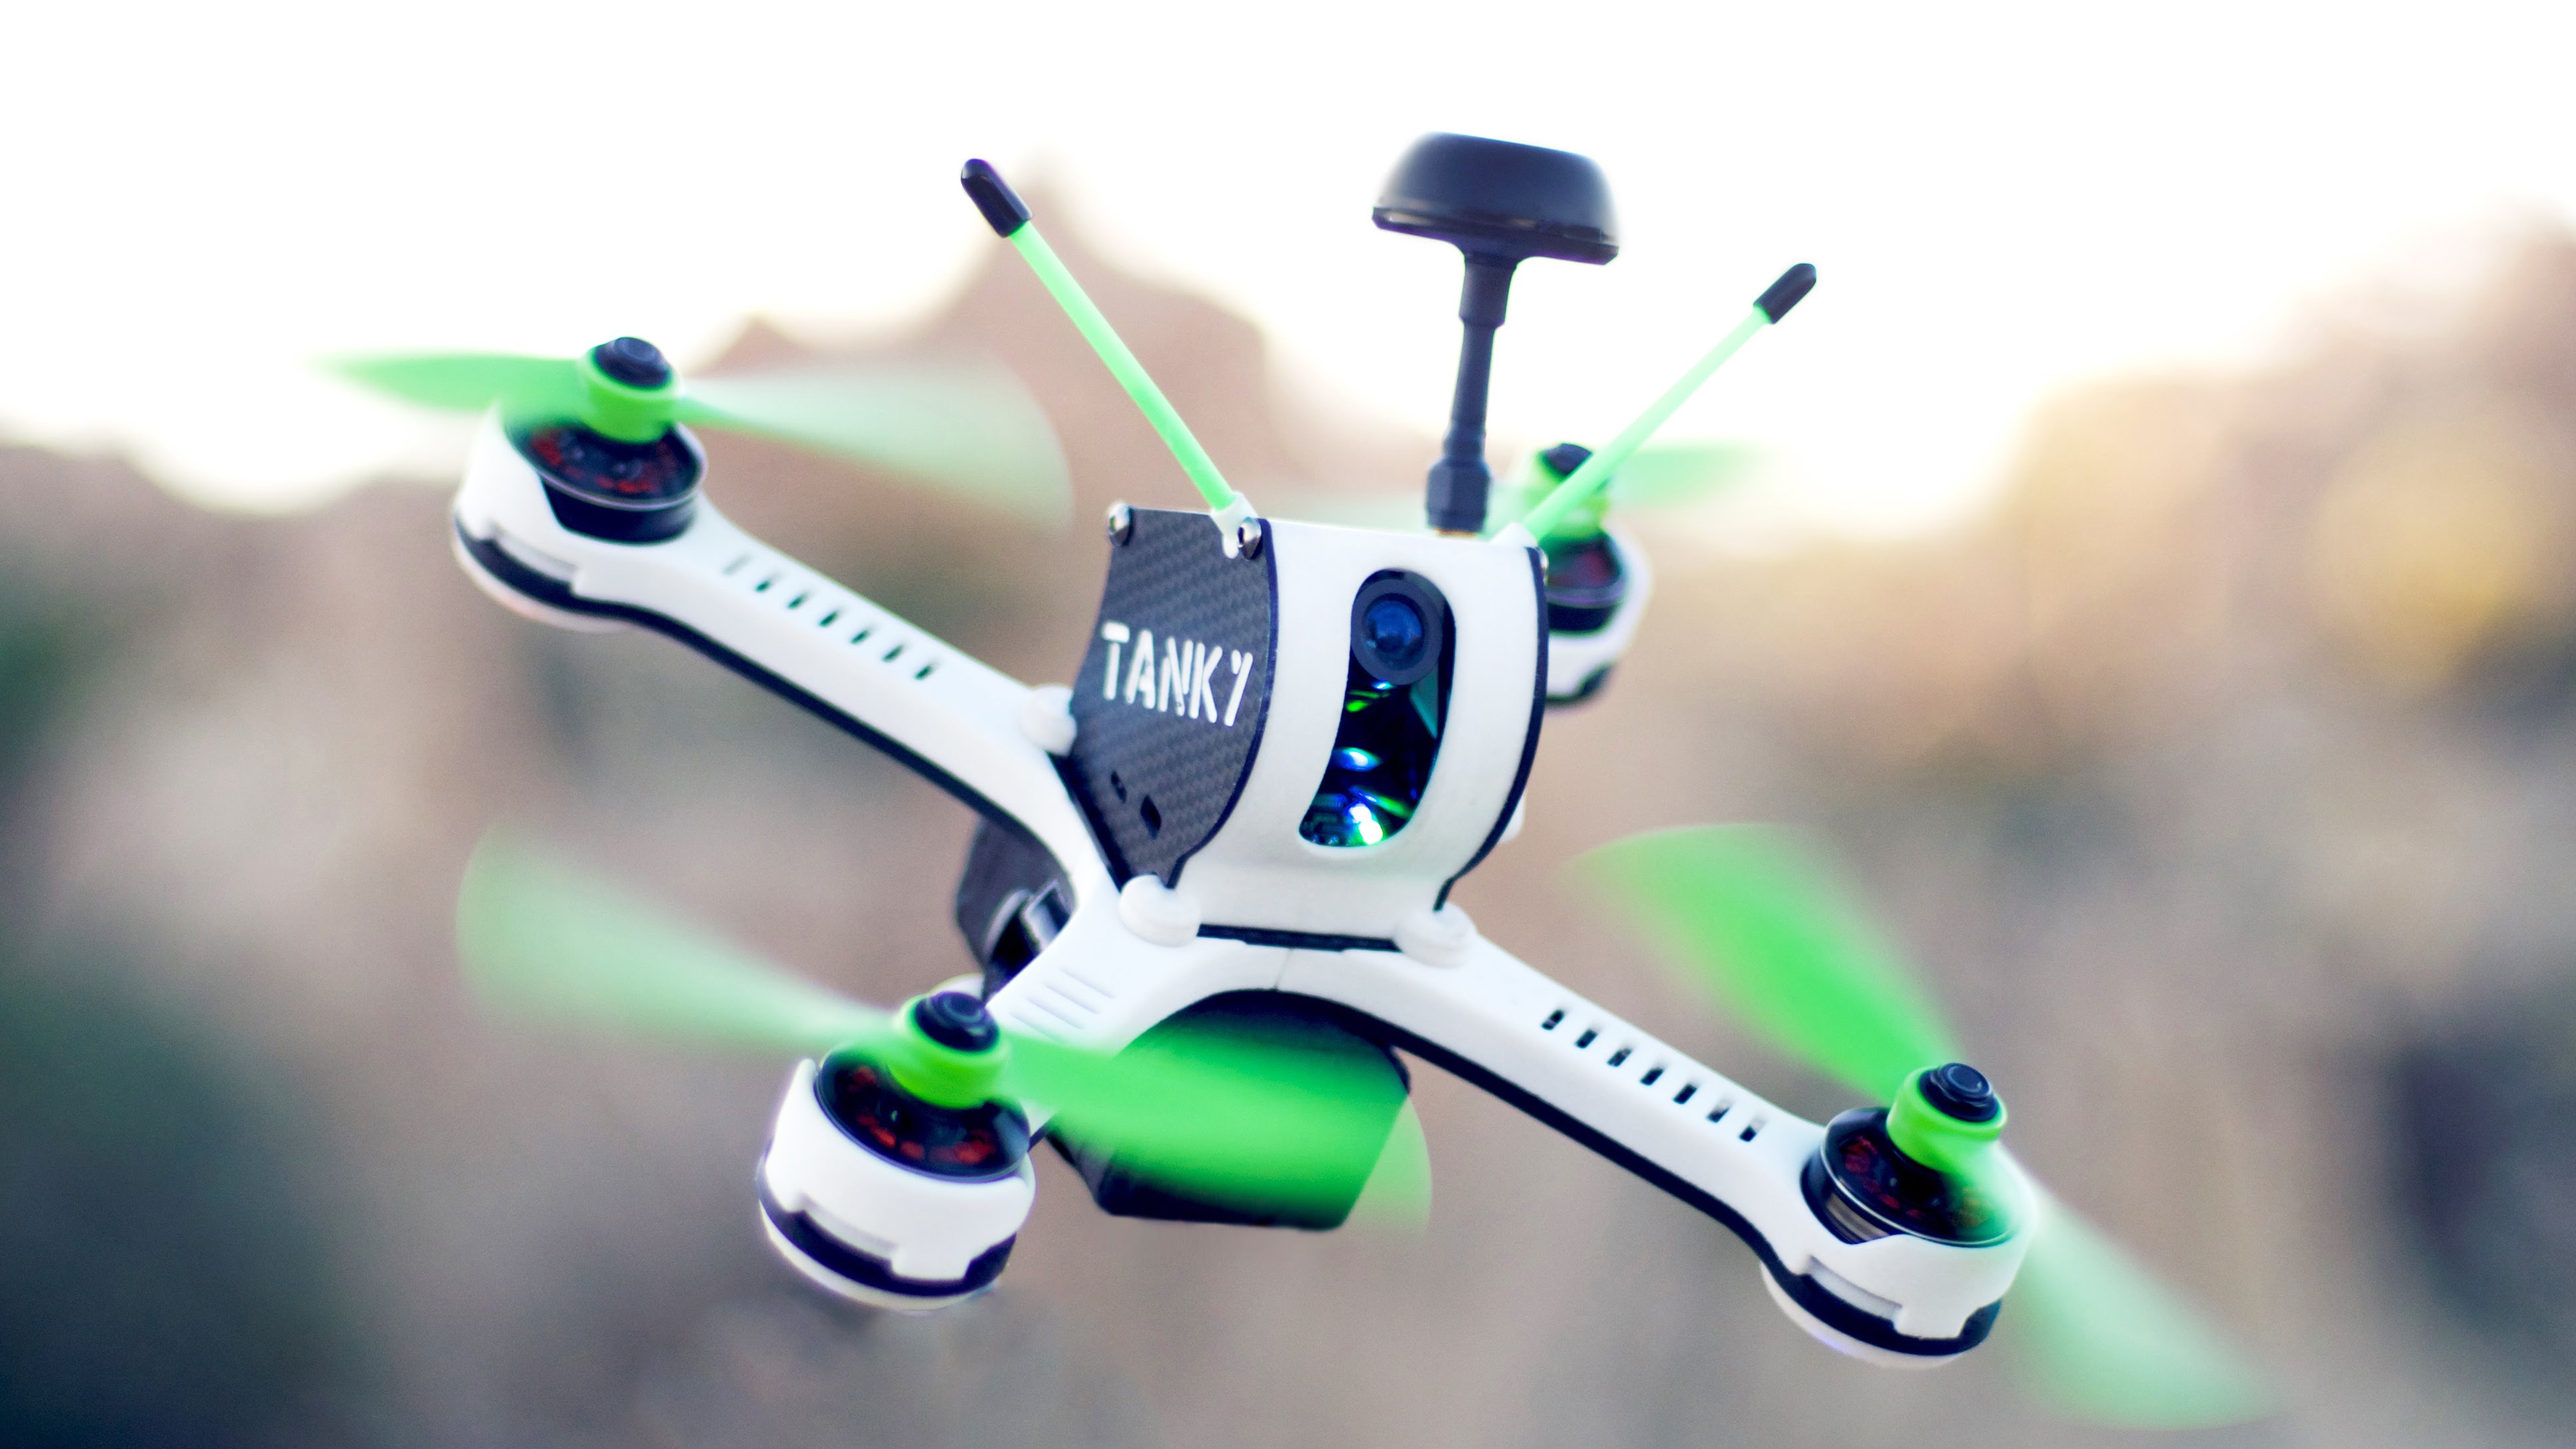 TANKY: World’s Fastest Production FPV Racing Drone Quadcopter